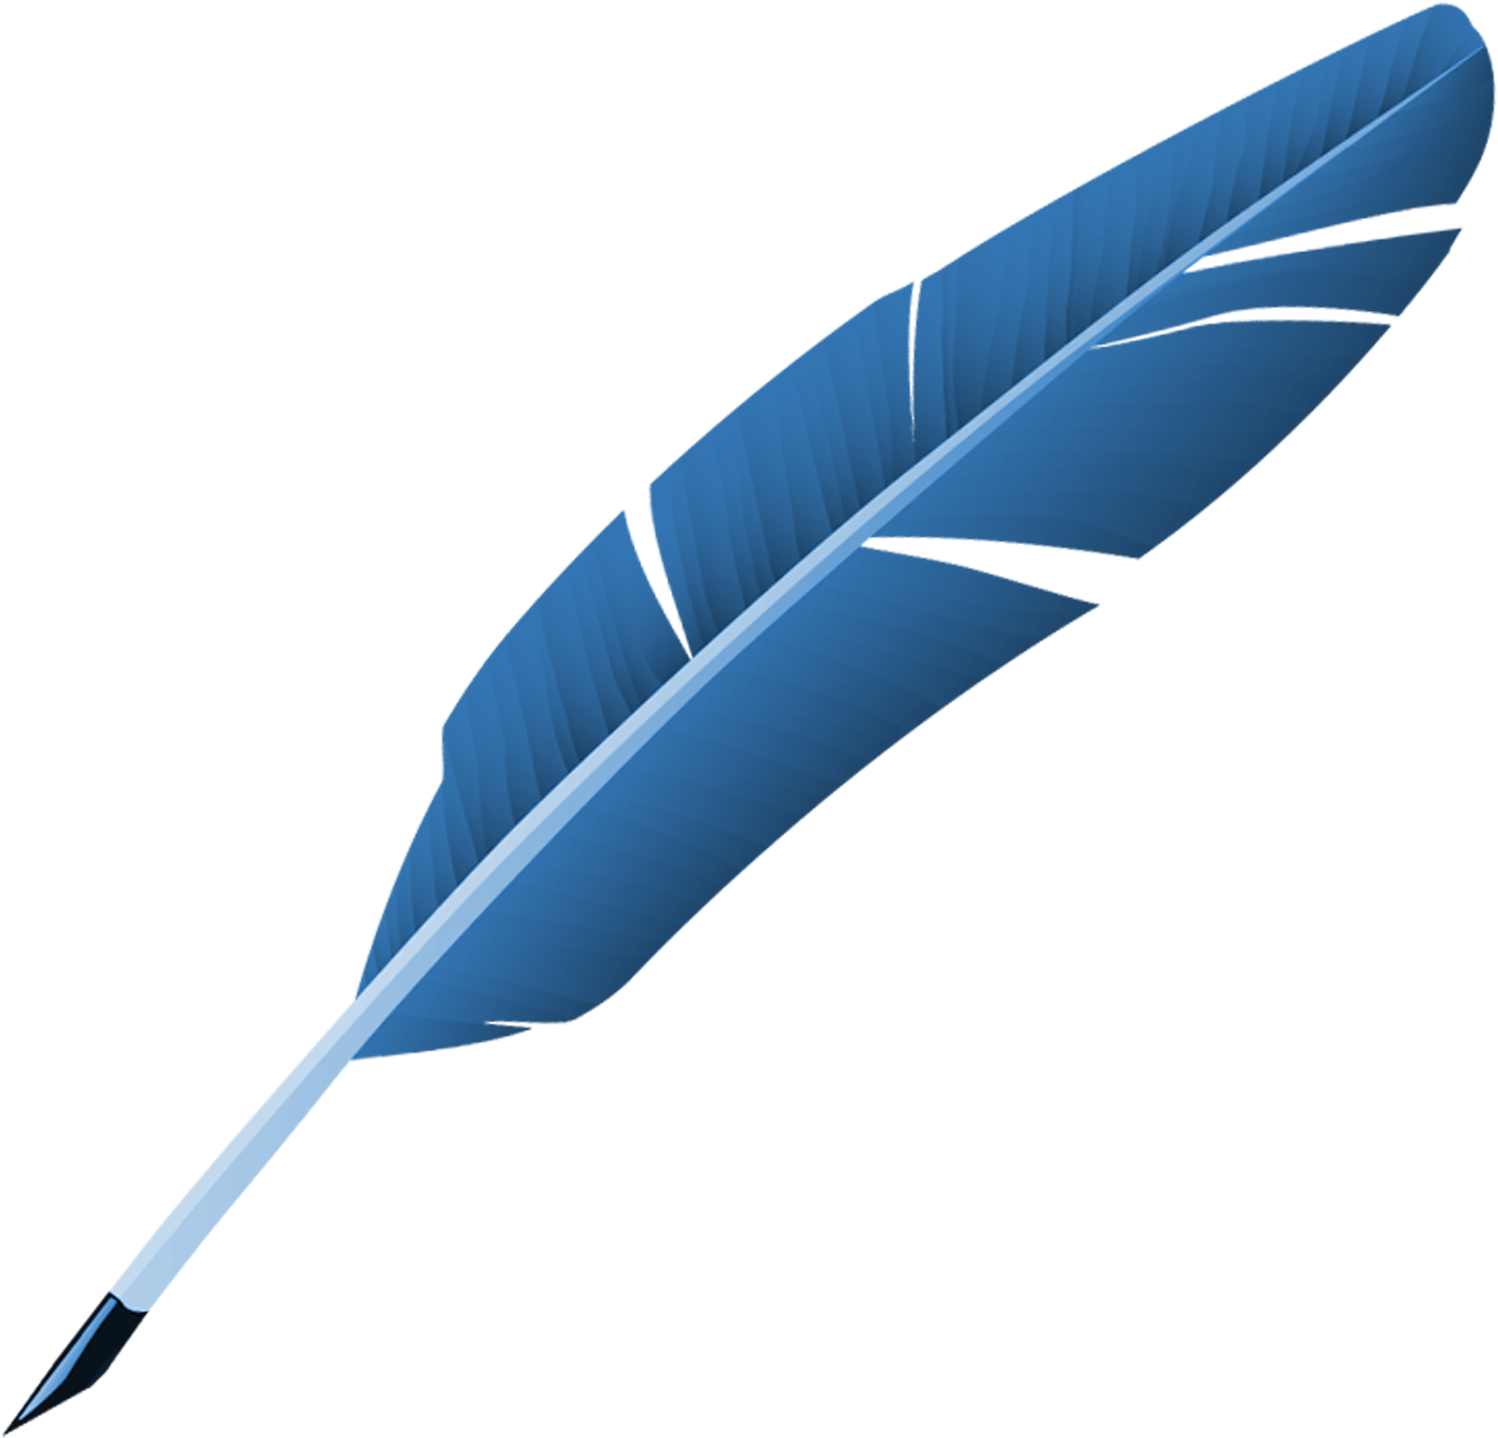 A Blue Feather On A Black Background